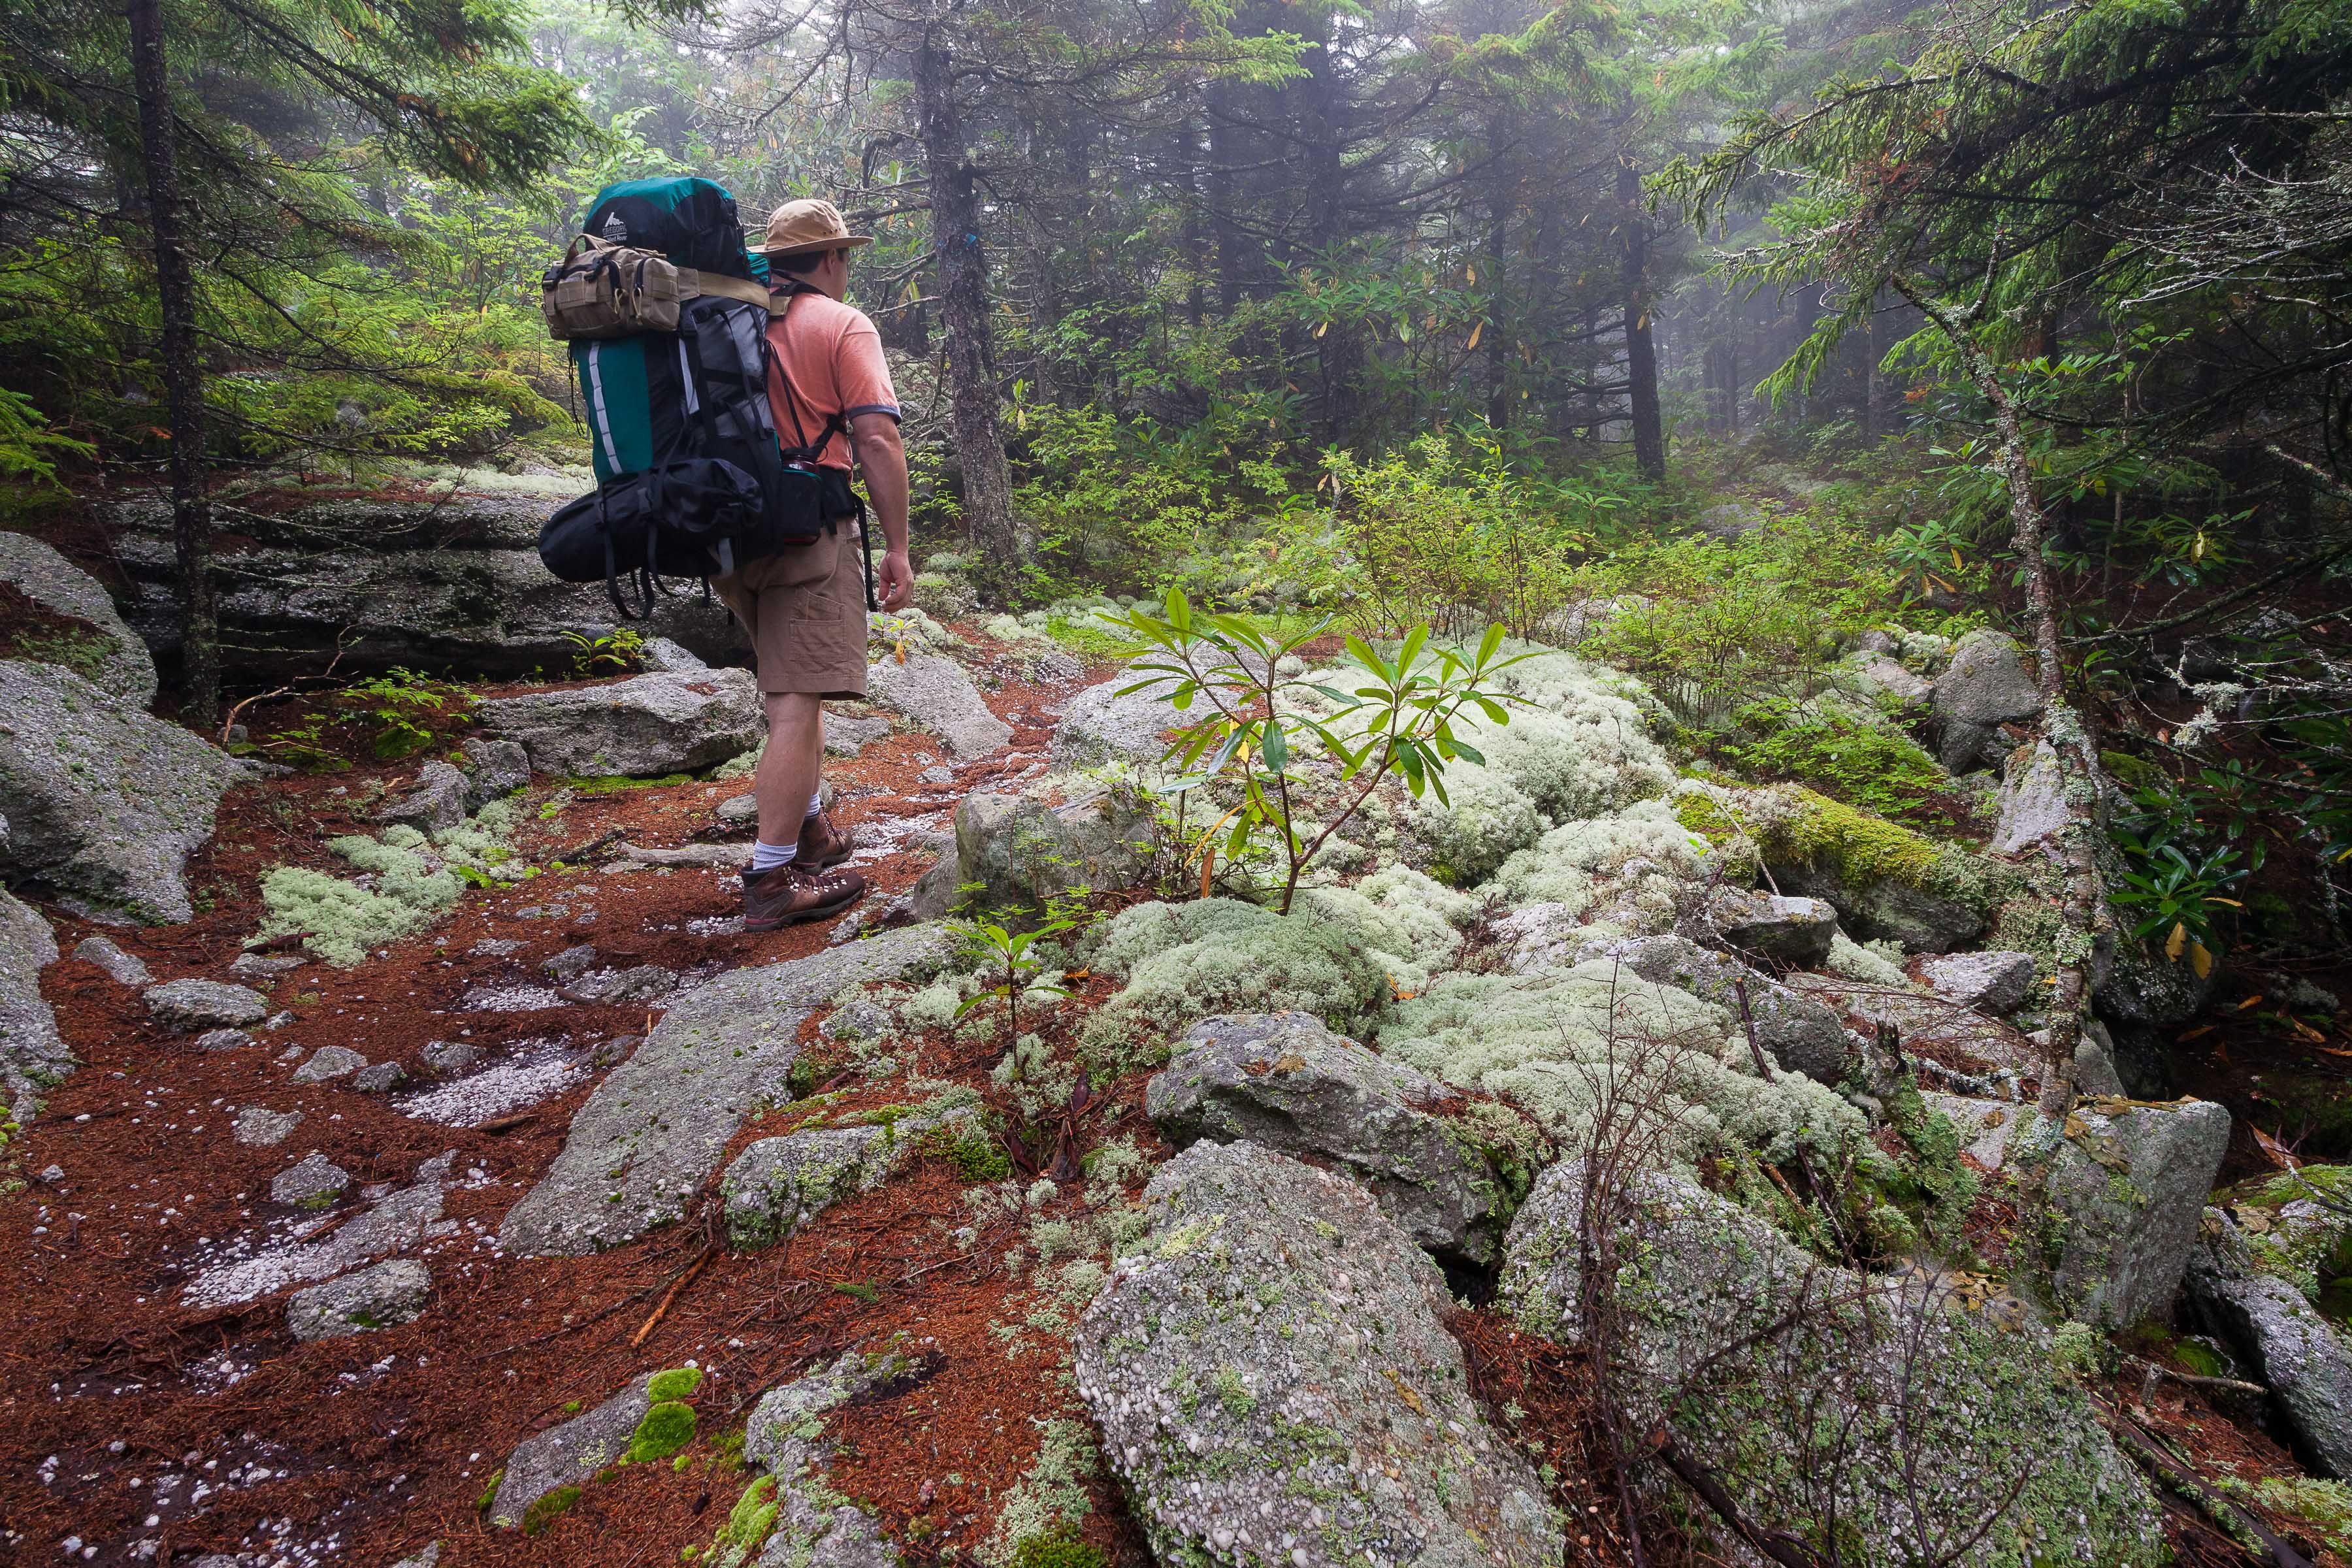 A man with a large bulky pack on his back hikes along a rocky trail dotted with tall fern plants.